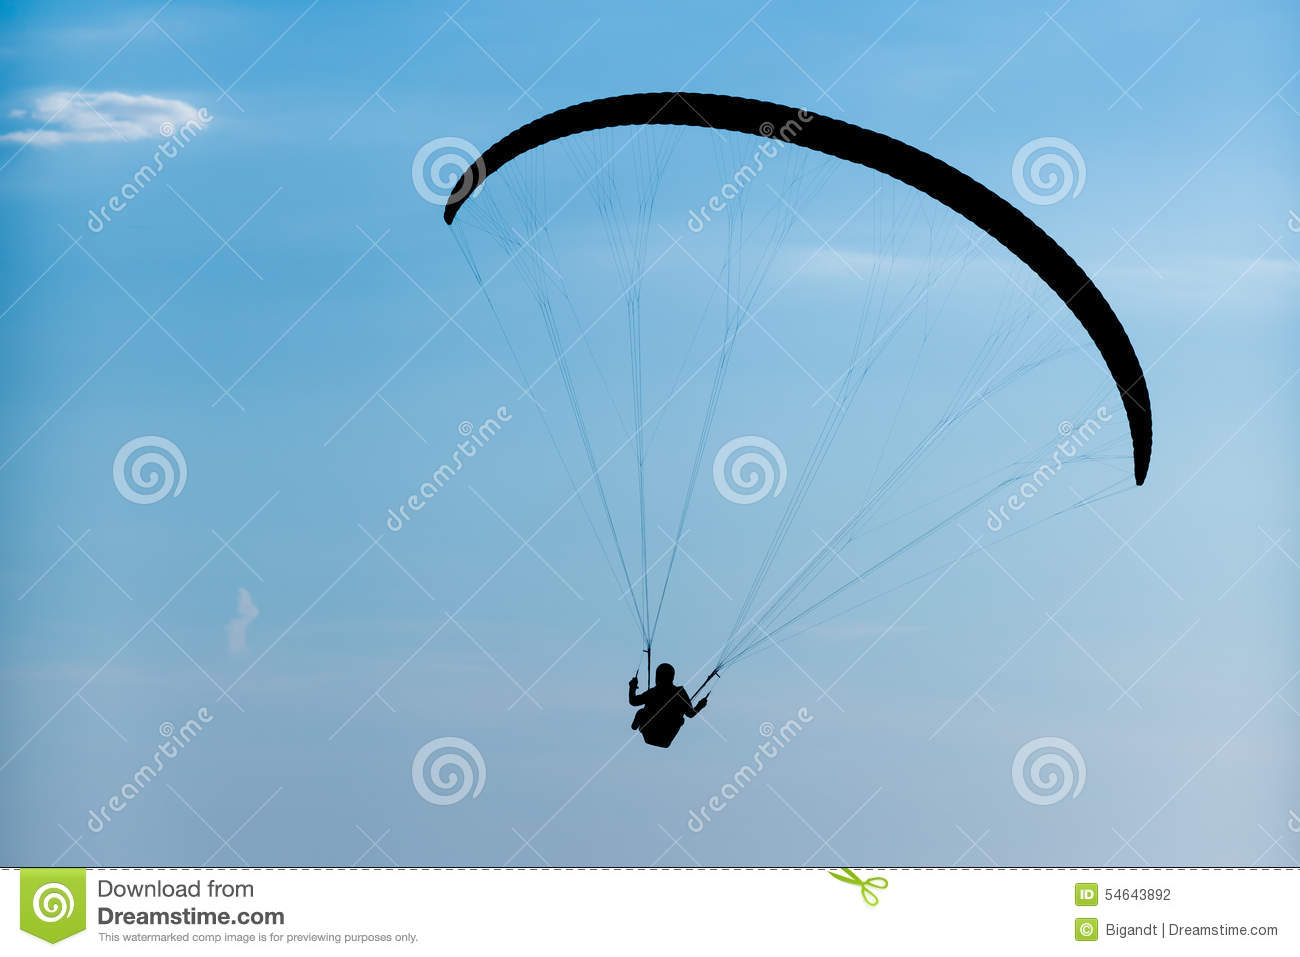 Of Man With Parachute With Dark Blue Skies In The Background